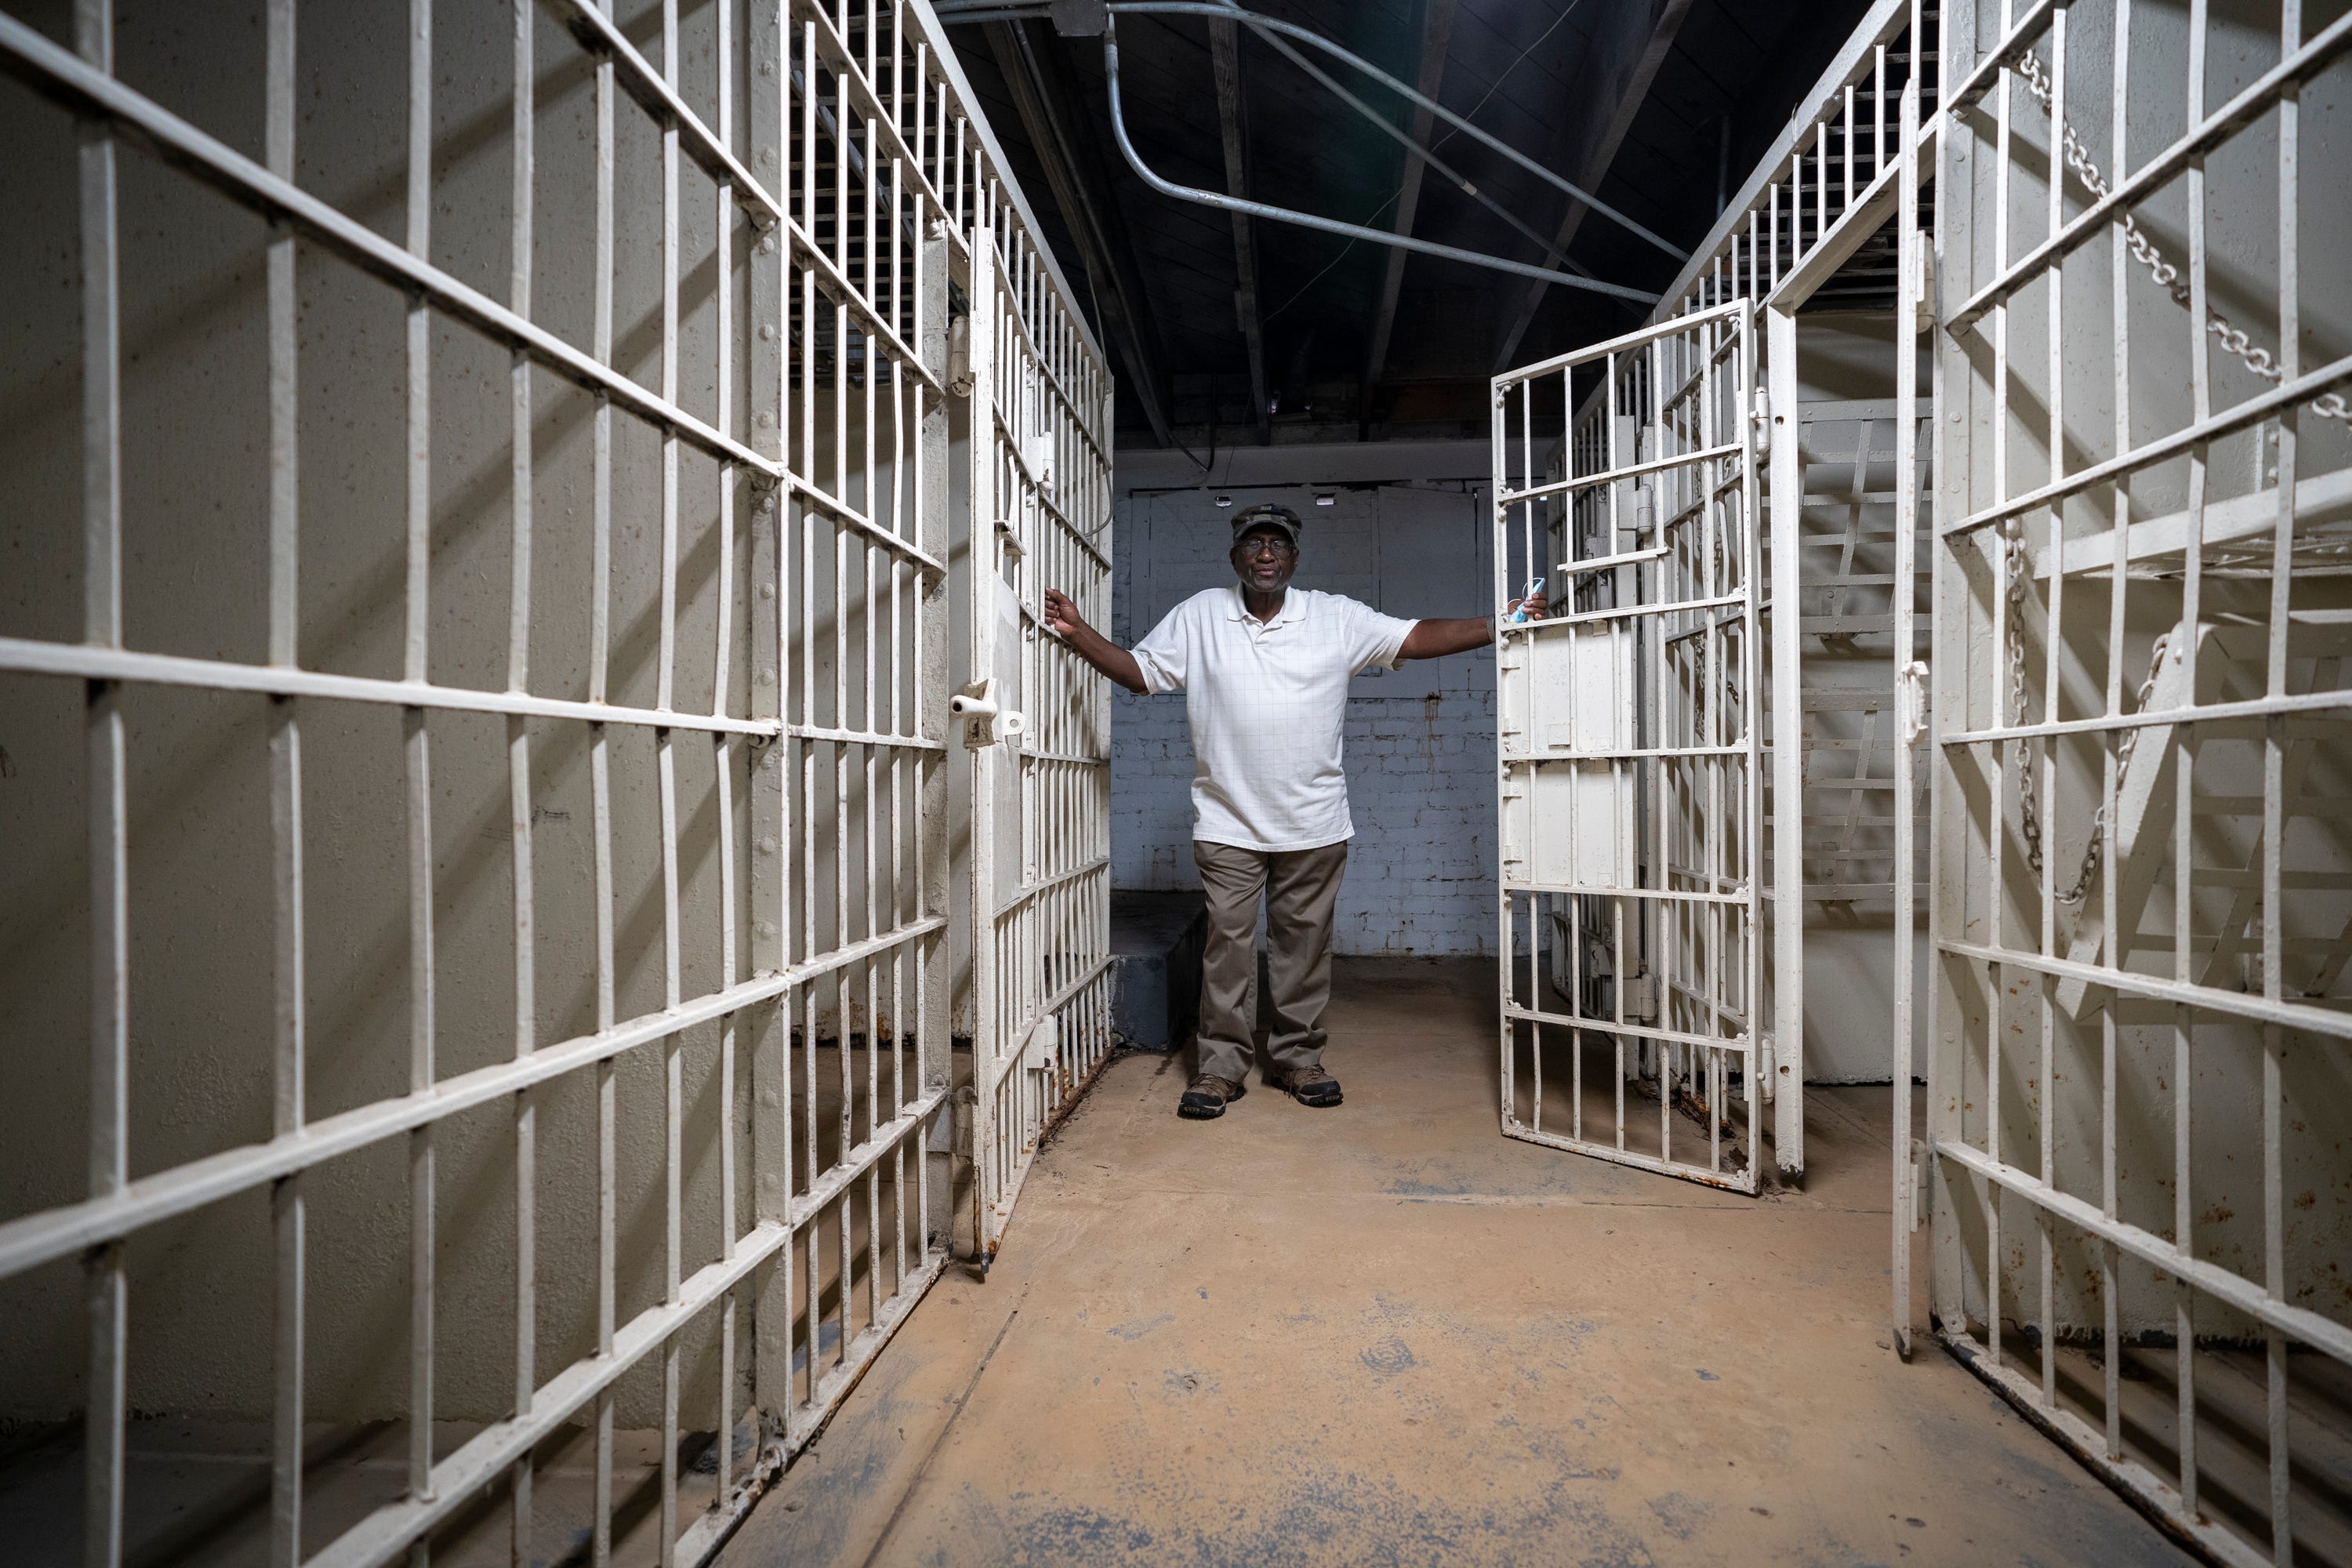 Robert "Bobby" Talbert, who was arrested along with Brenda Travis and Ike Lewis for sitting in the white-only section of the Greyhound bus station, stands in the basement jail of McComb City Hall where they were initially held in McComb, Miss.